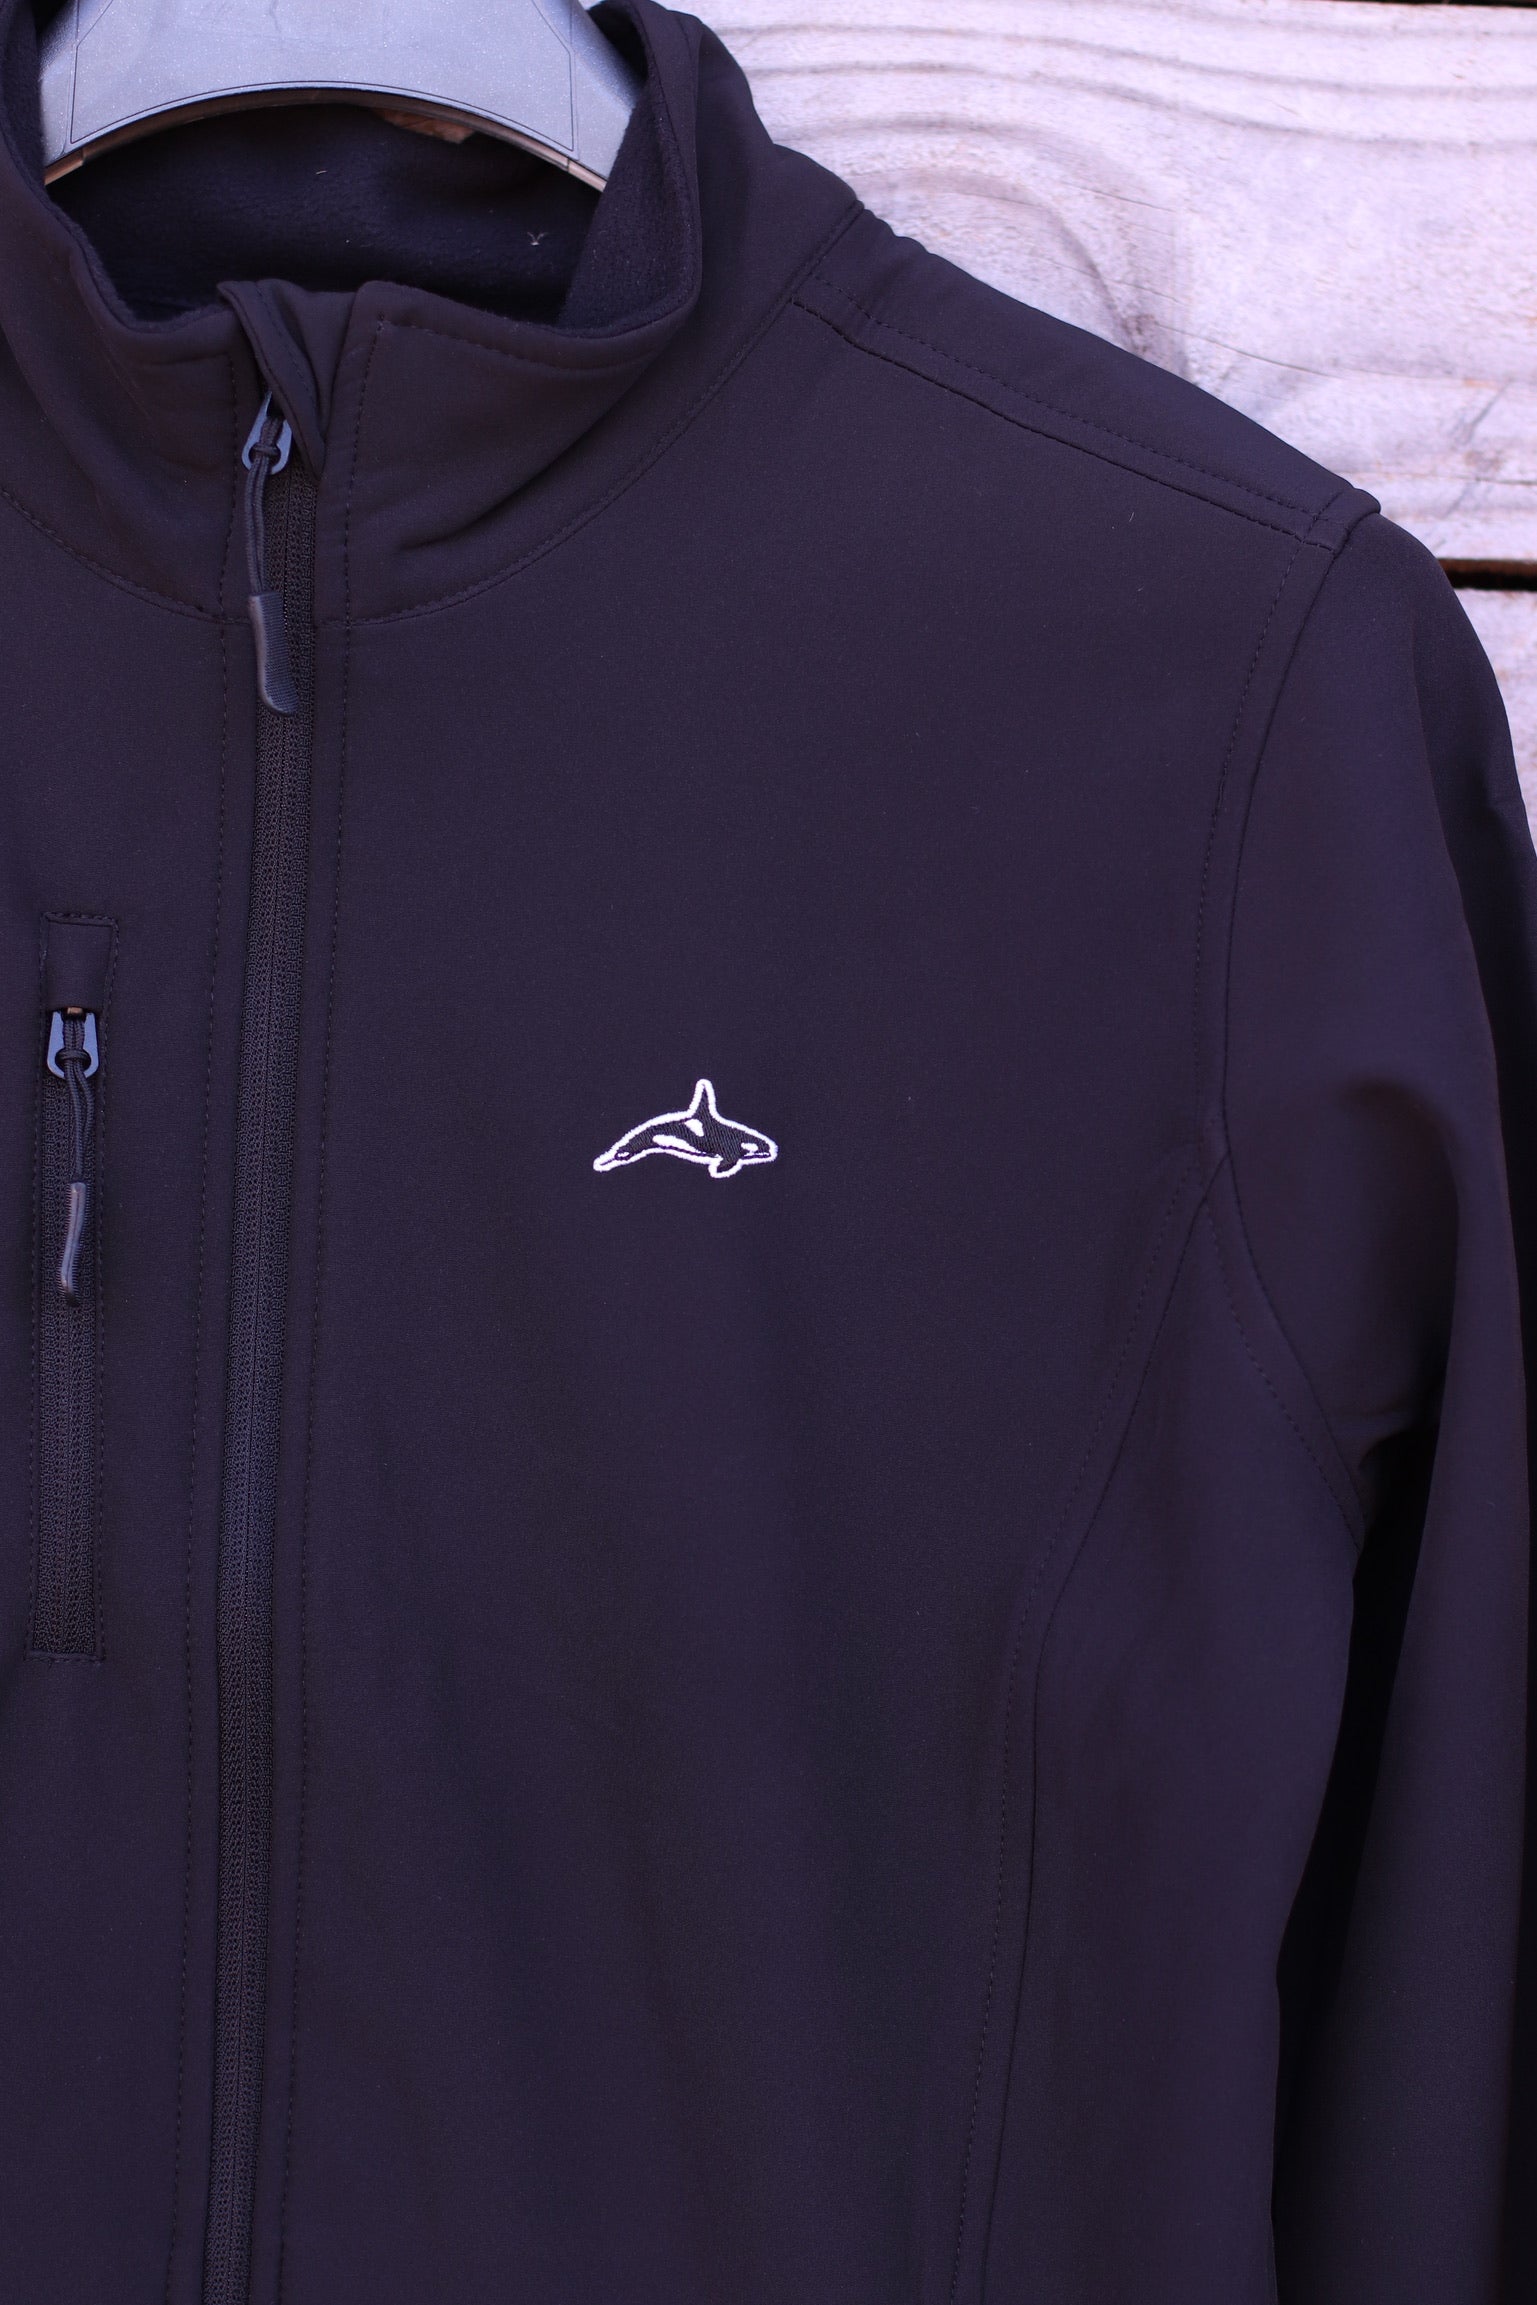 Softshell Jackets: The Ideal Choice for Any Adventure